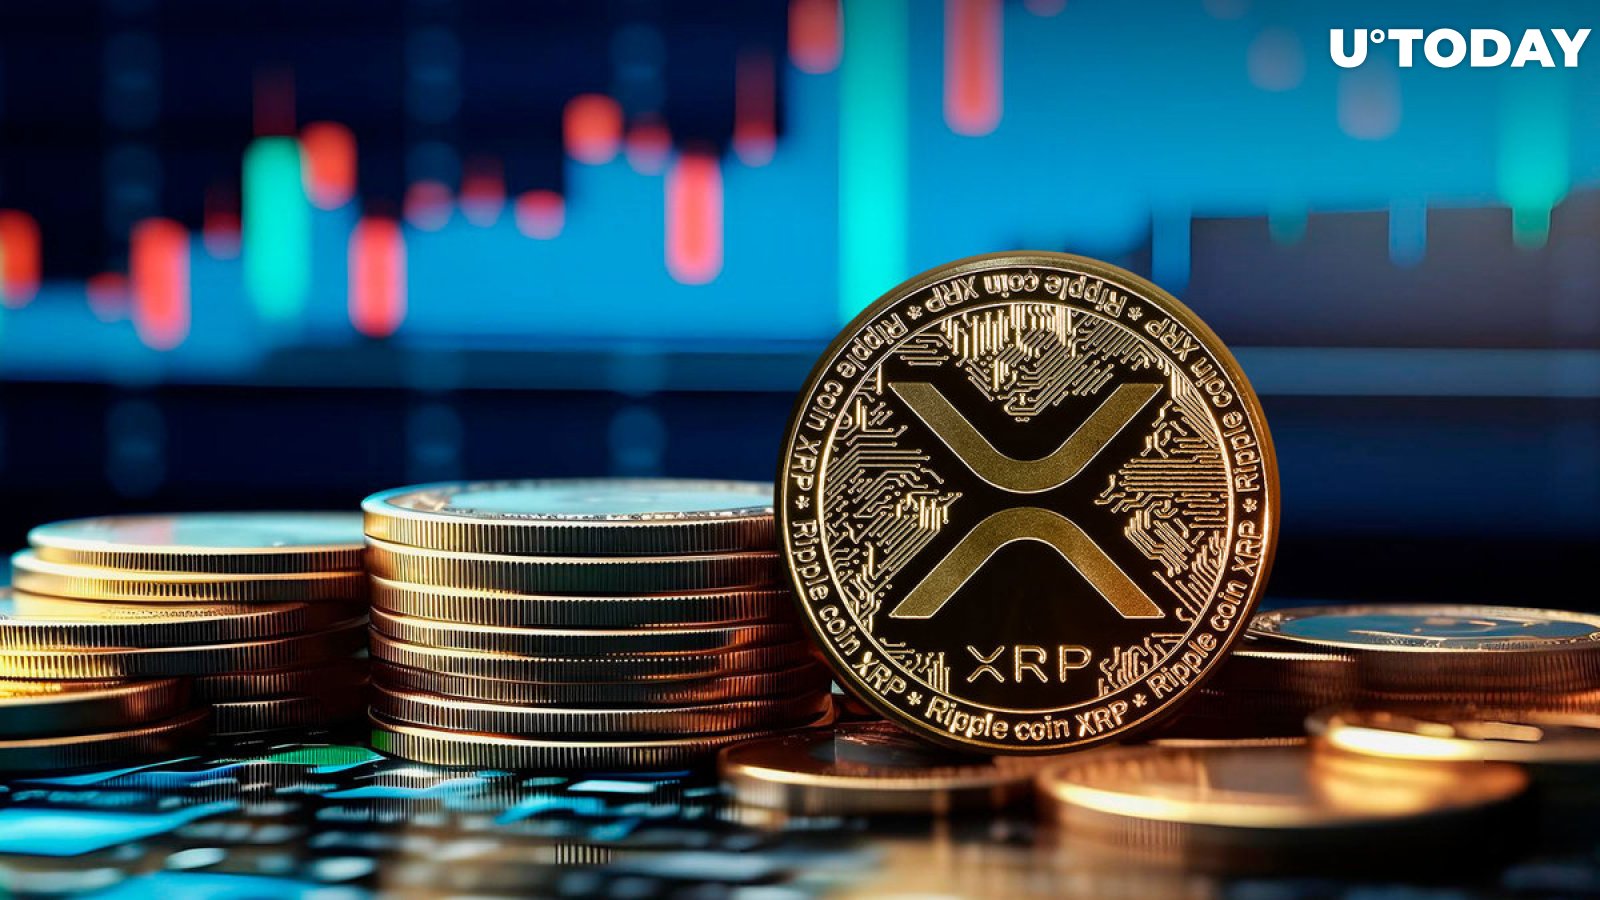 This XRP Metric Rises to $10 Billion and May Bigly Affect Price